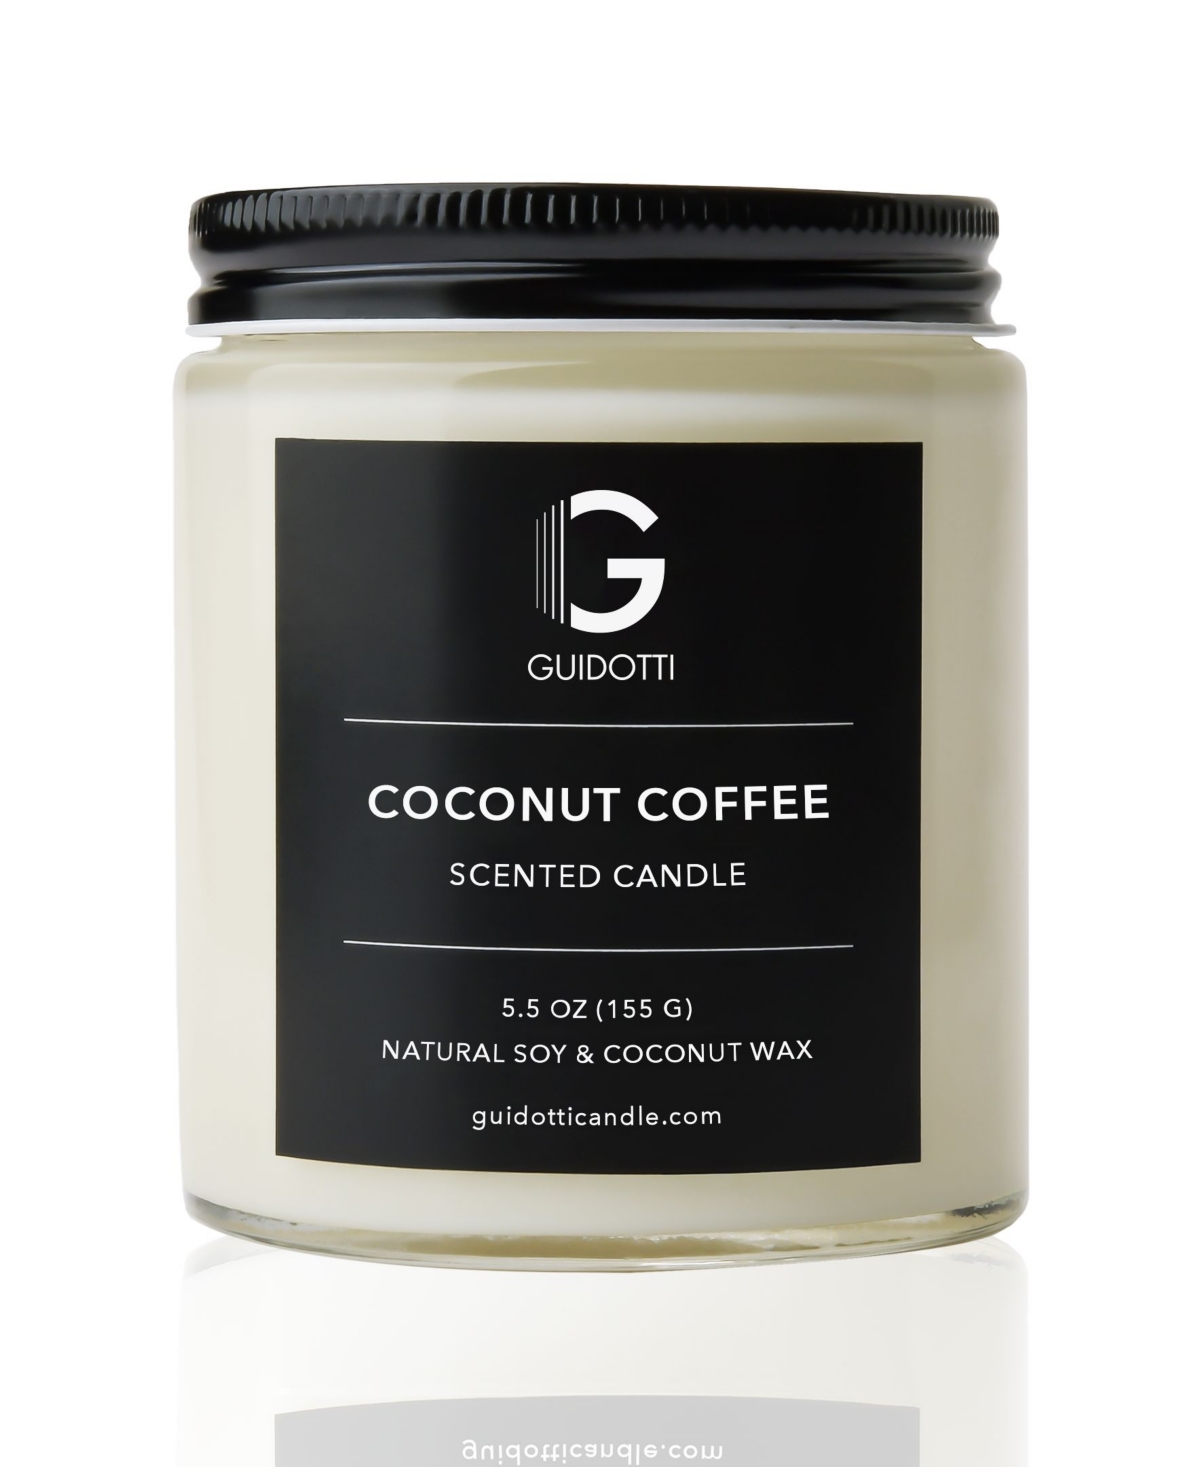 Coconut Coffee Scented Candle, 1-Wick, 5.5 oz